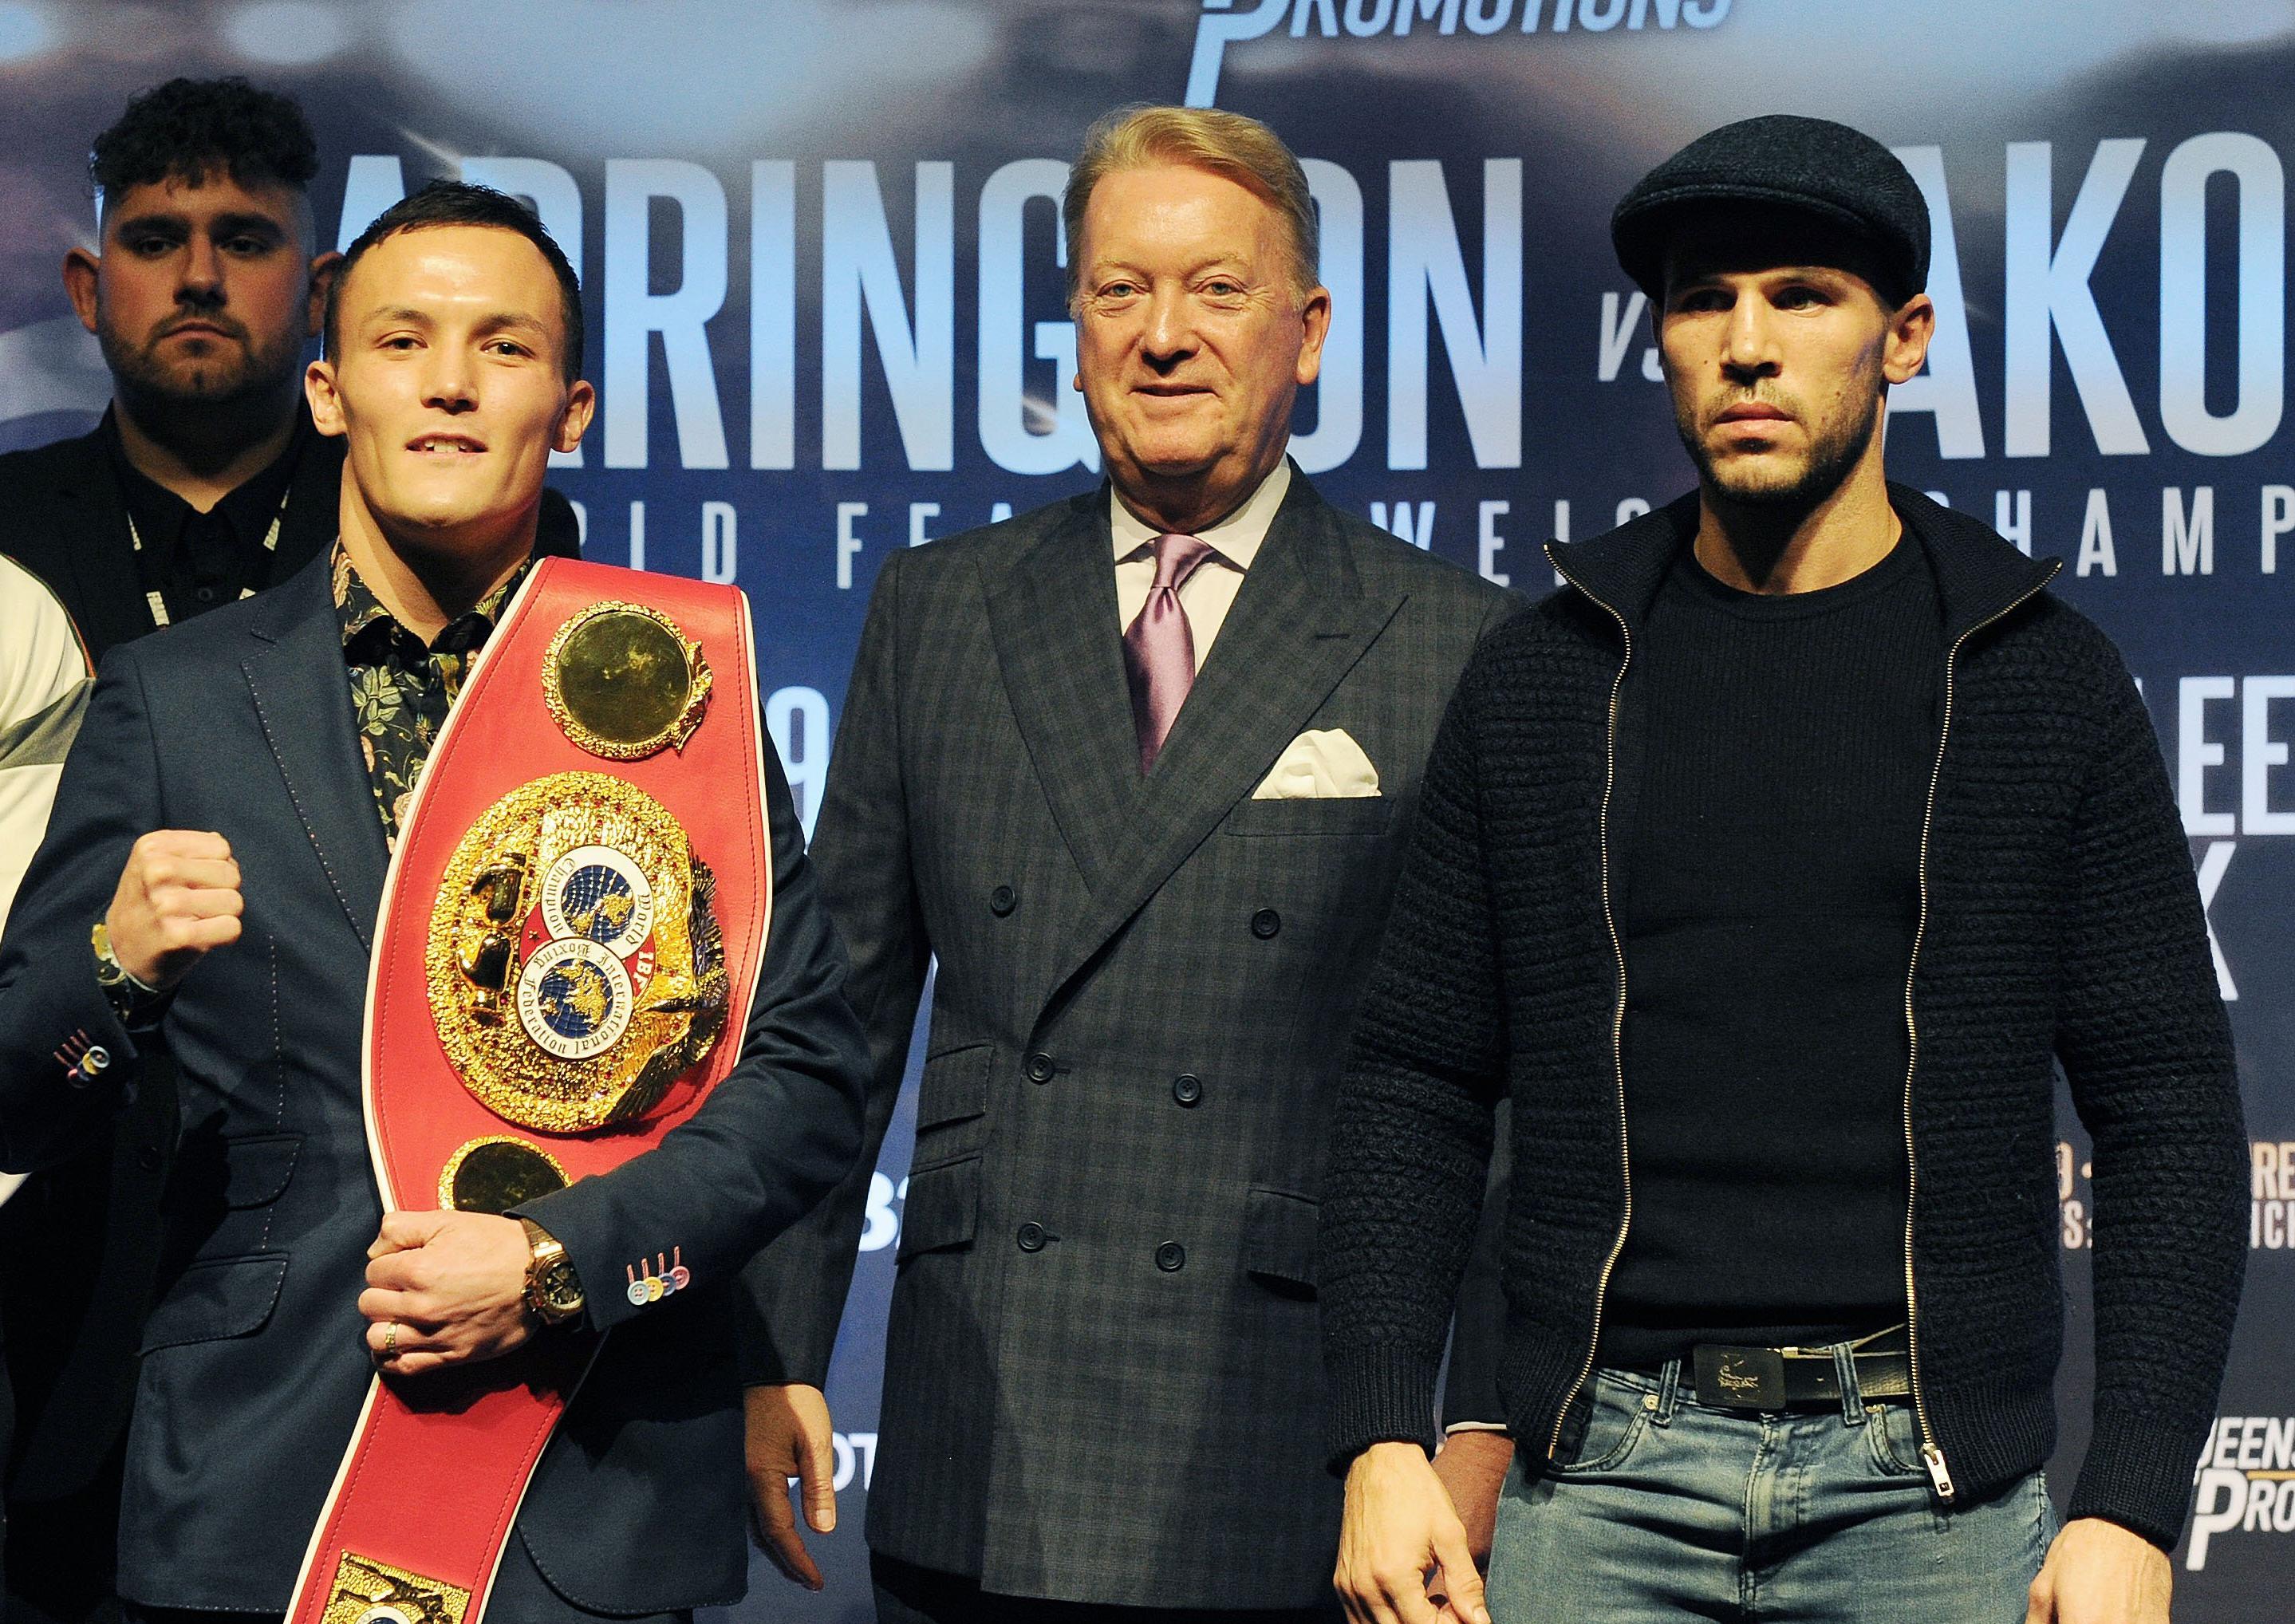 Josh Warrington poses with promoter Frank Warren and opponent Sofiane Takouchtat ahead of their bout at First Direct Leeds Arena last year. Picture: Steve Riding.